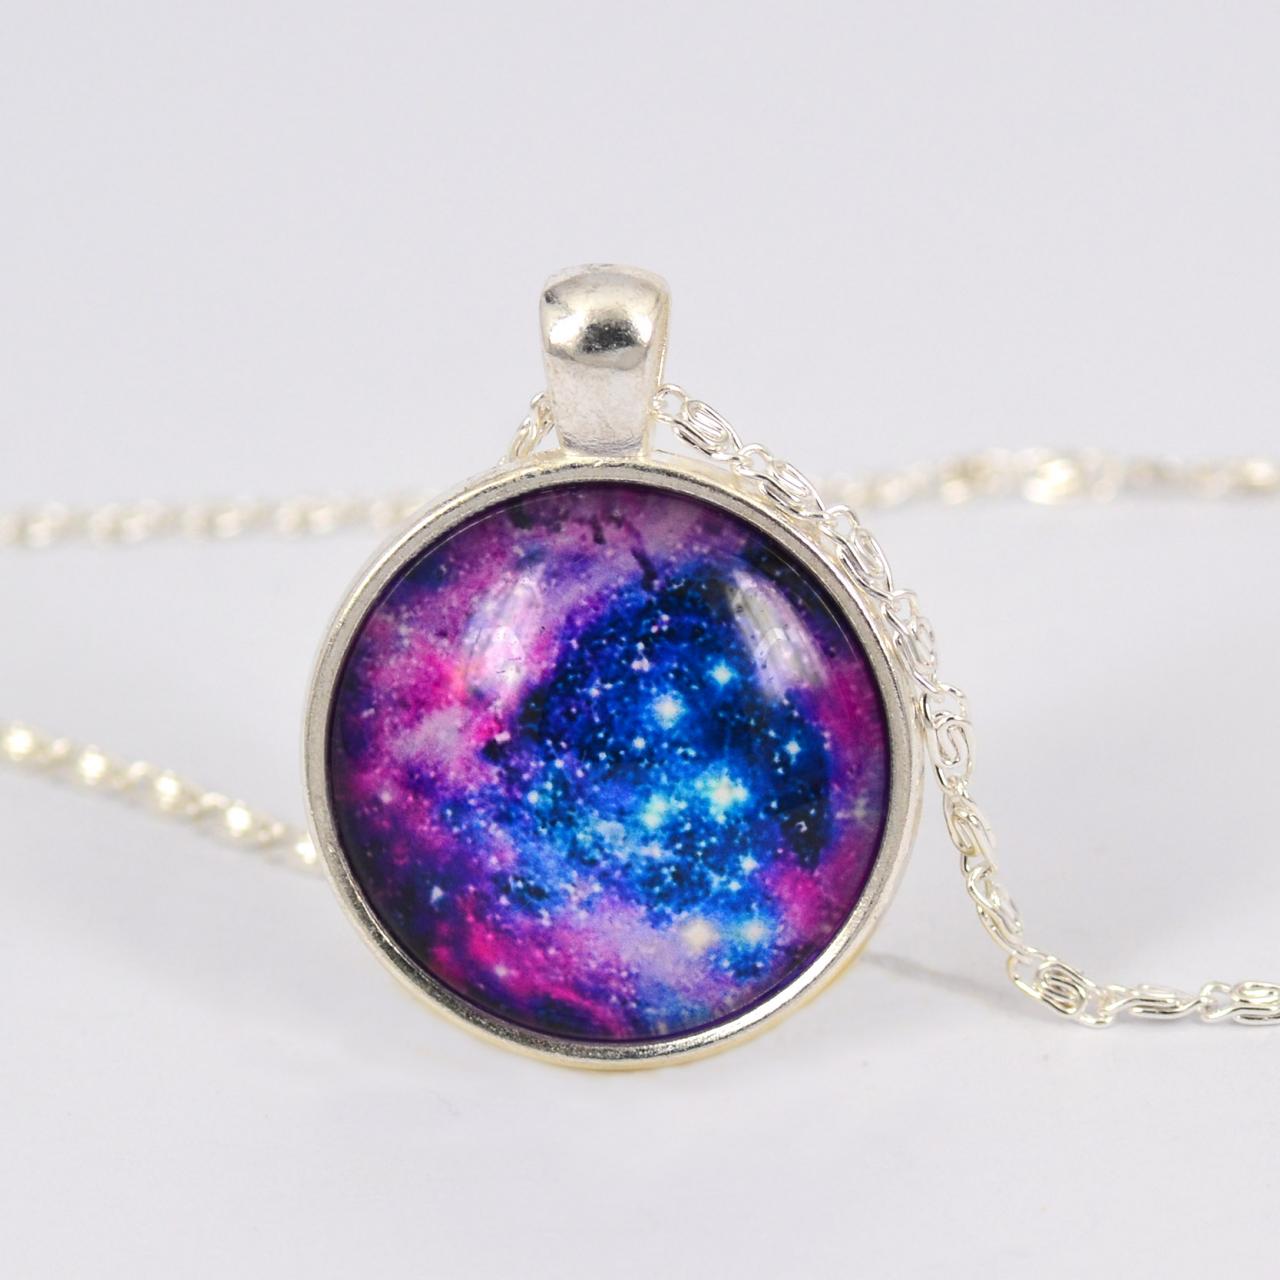 Vintage Purple Milky Way Galaxy Picture Planet Pendant Glass Cabochon Necklace,silver Plated, Gift #ib731